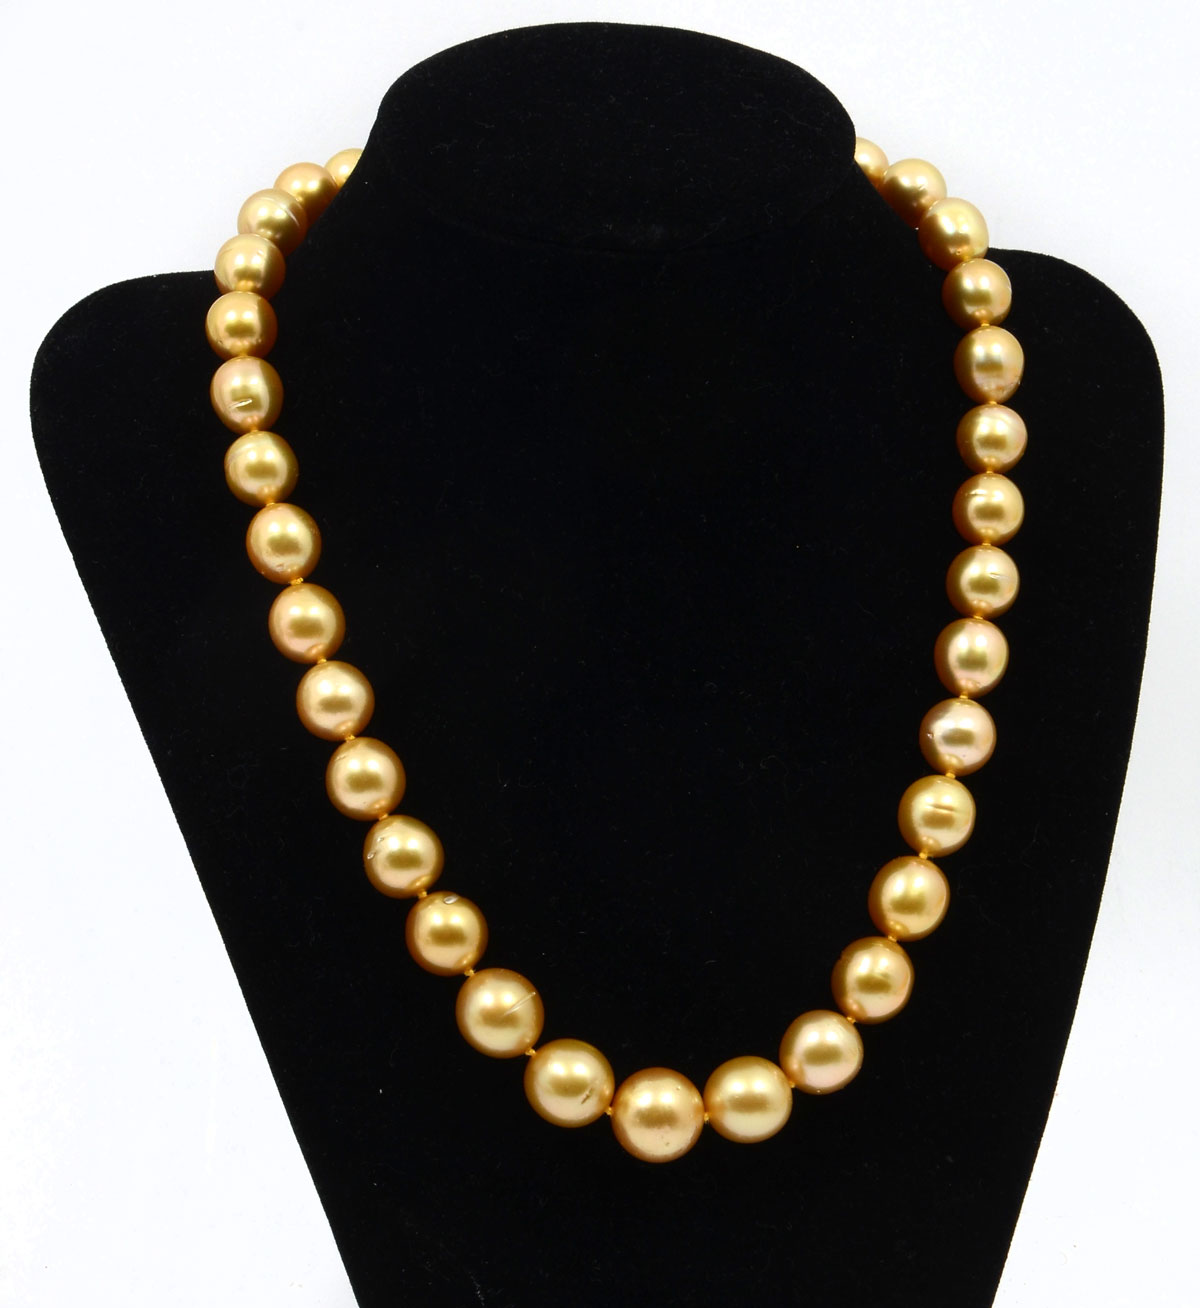 GOLDEN SOUTH SEAS PEARL NECKLACE: